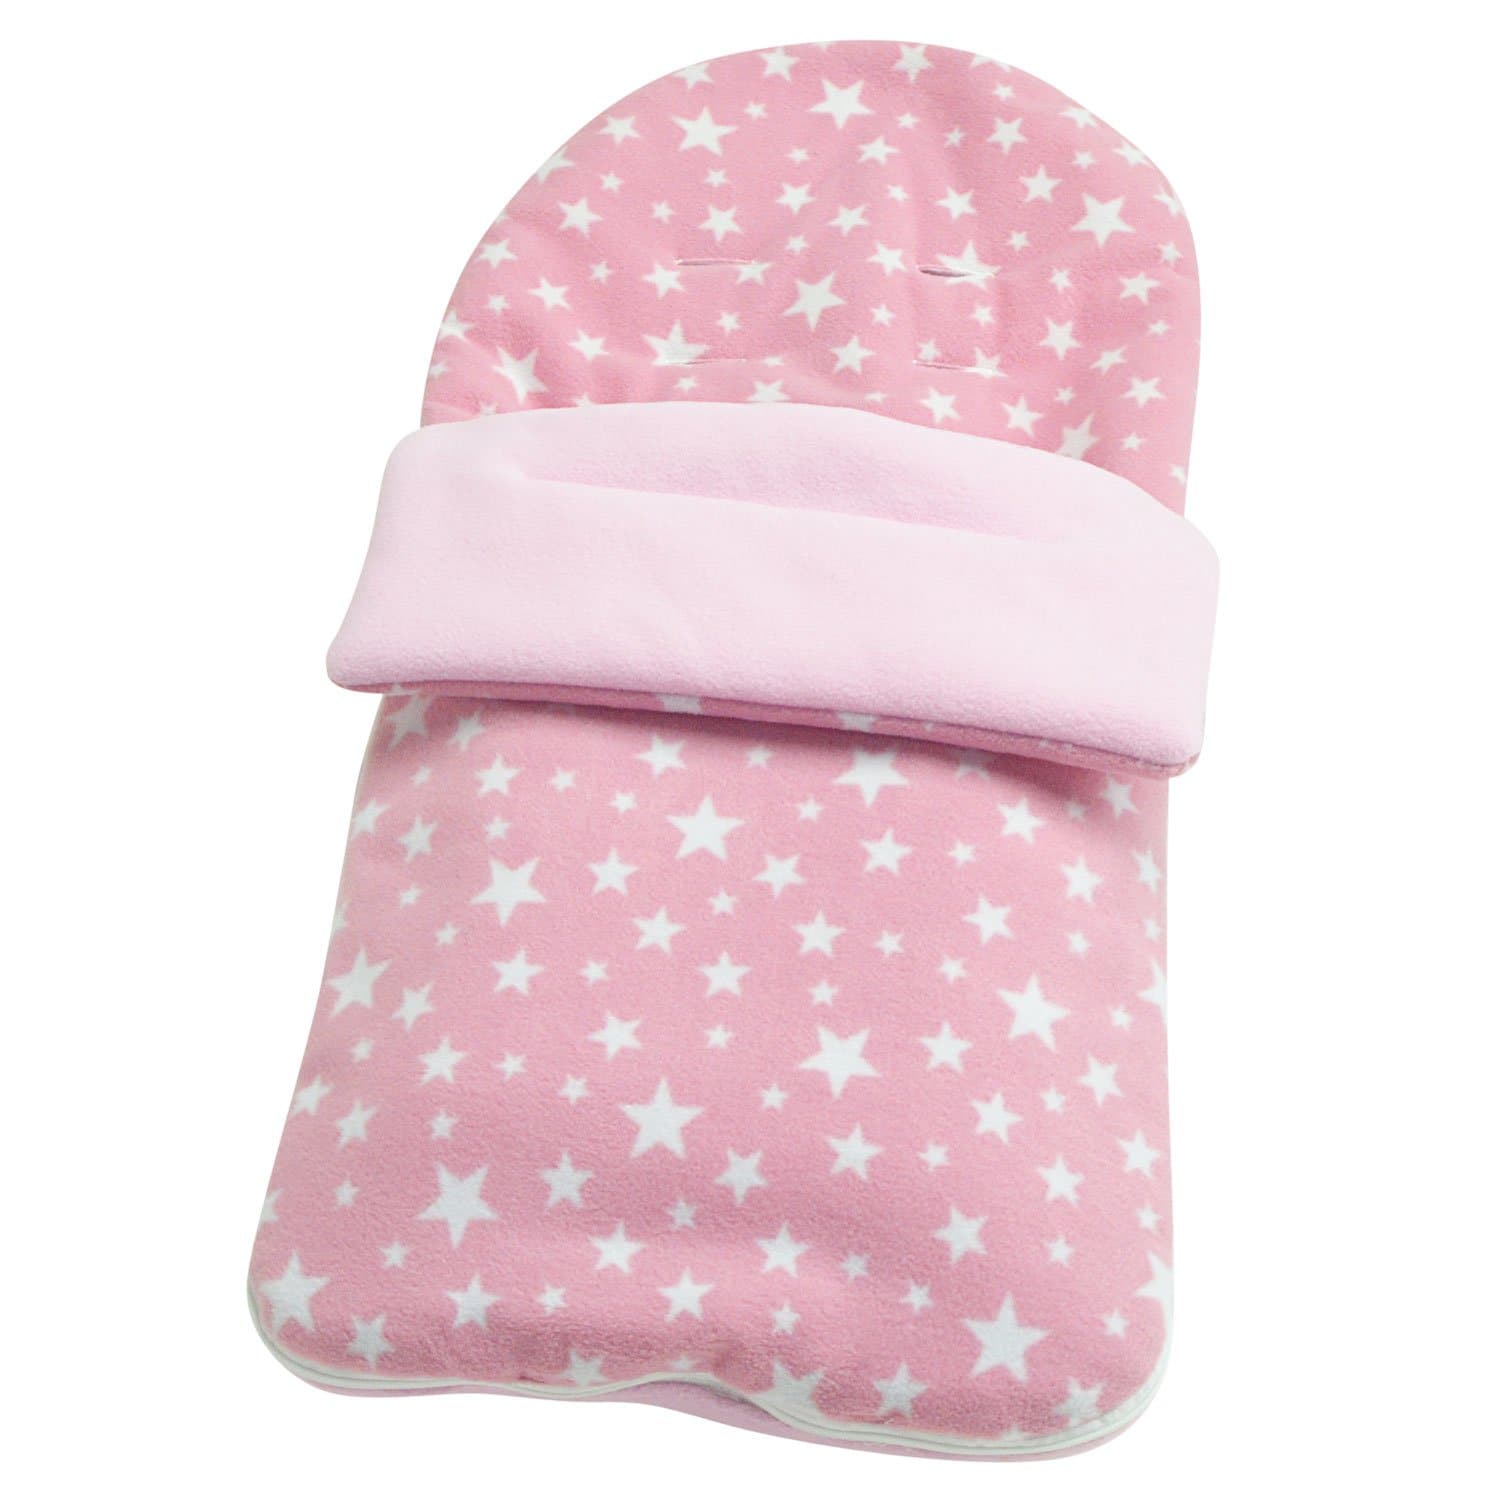 Universal Fleece Pushchair Footmuff / Cosy Toes - Fits All Pushchairs / Prams And Buggies   